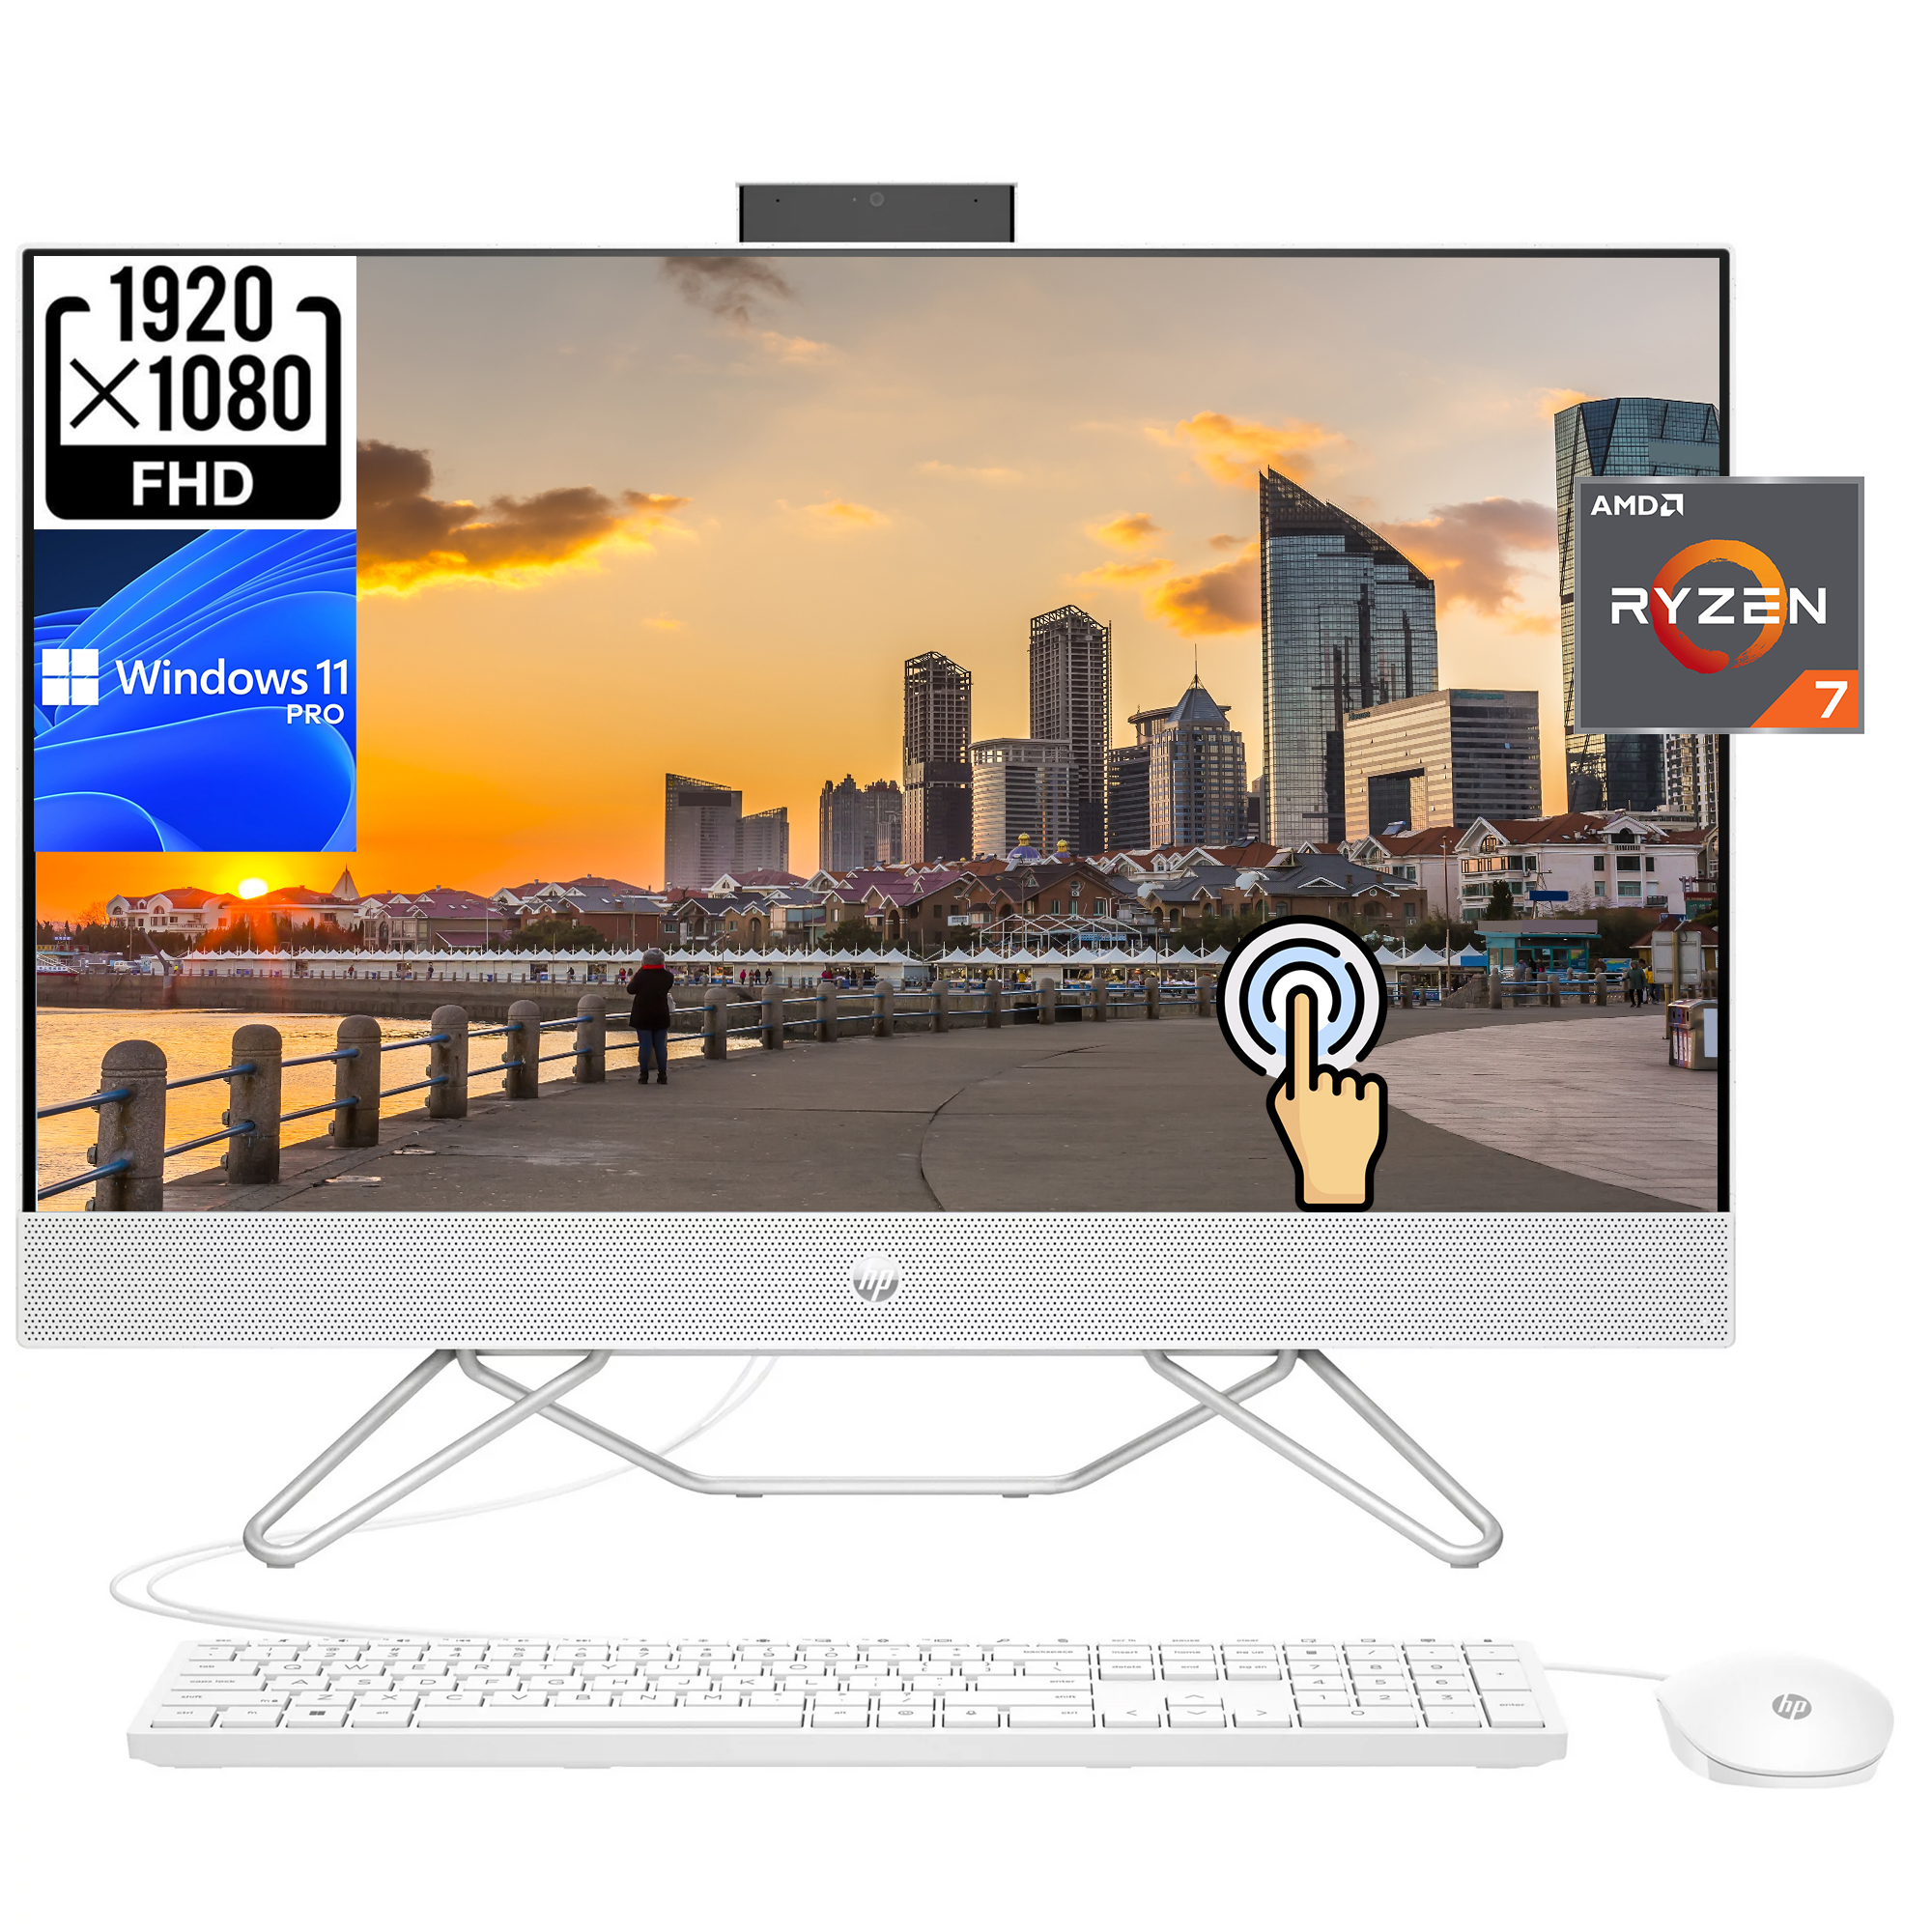 HP 27" FHD Touchscreen All-in-One [Windows 11 Pro] Business Desktop Computer PC, 8-Core AMD Ryzen 7 5700U(up to 4.3 GHz), 12GB RAM, 1TB PCIe SSD, Wi-Fi, Bluetooth, Wired Keyboard & Mouse - image 1 of 6